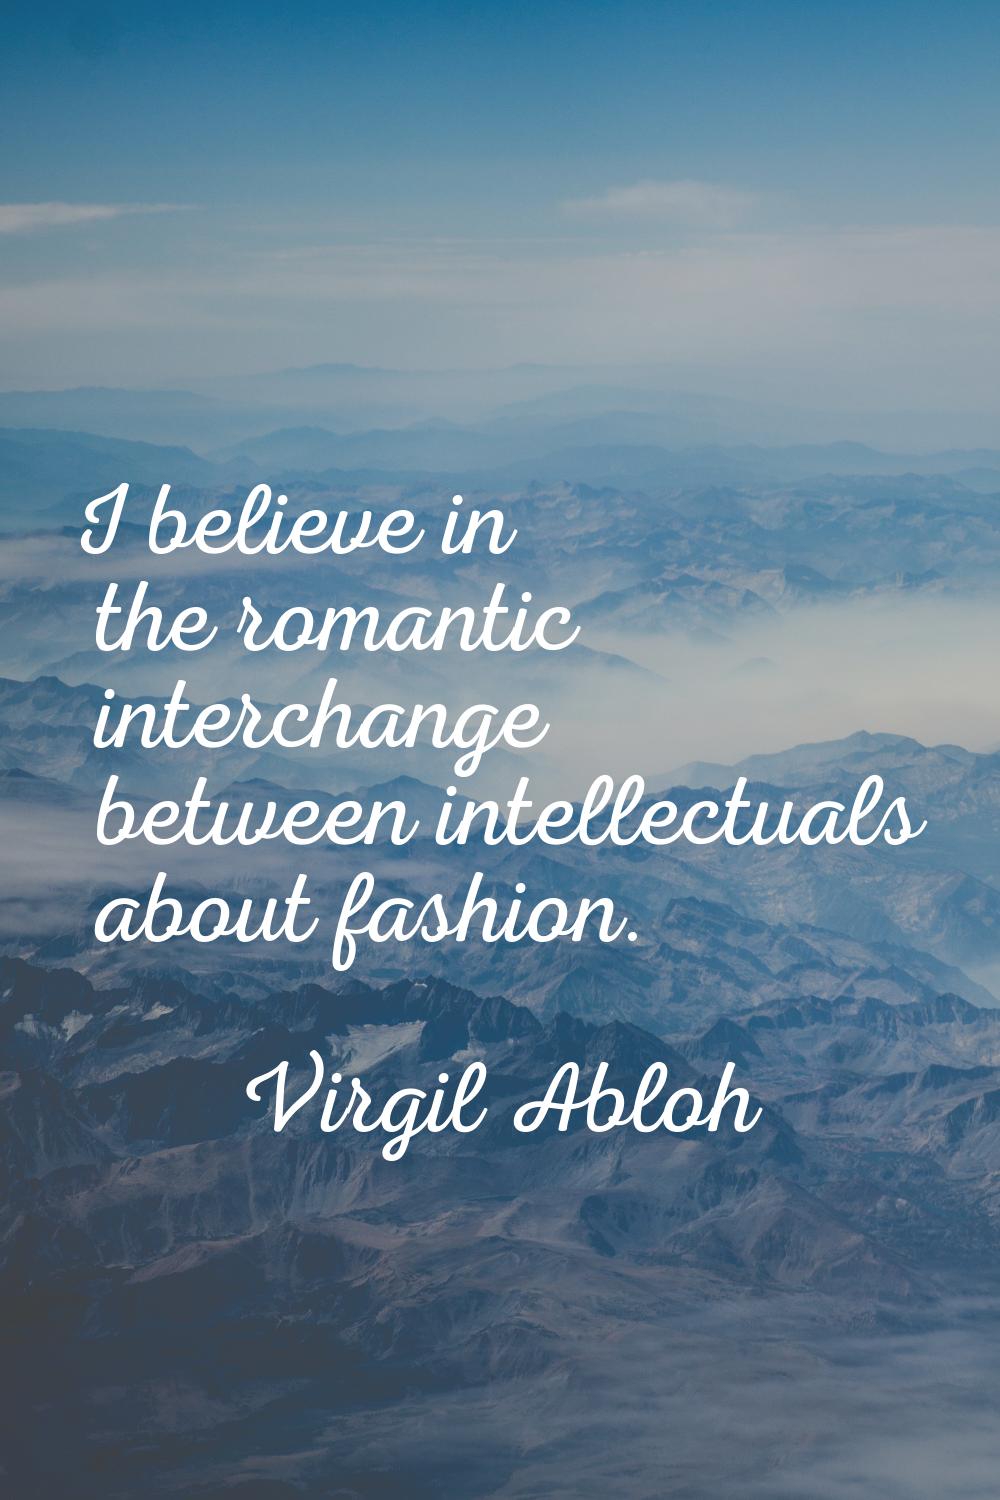 I believe in the romantic interchange between intellectuals about fashion.